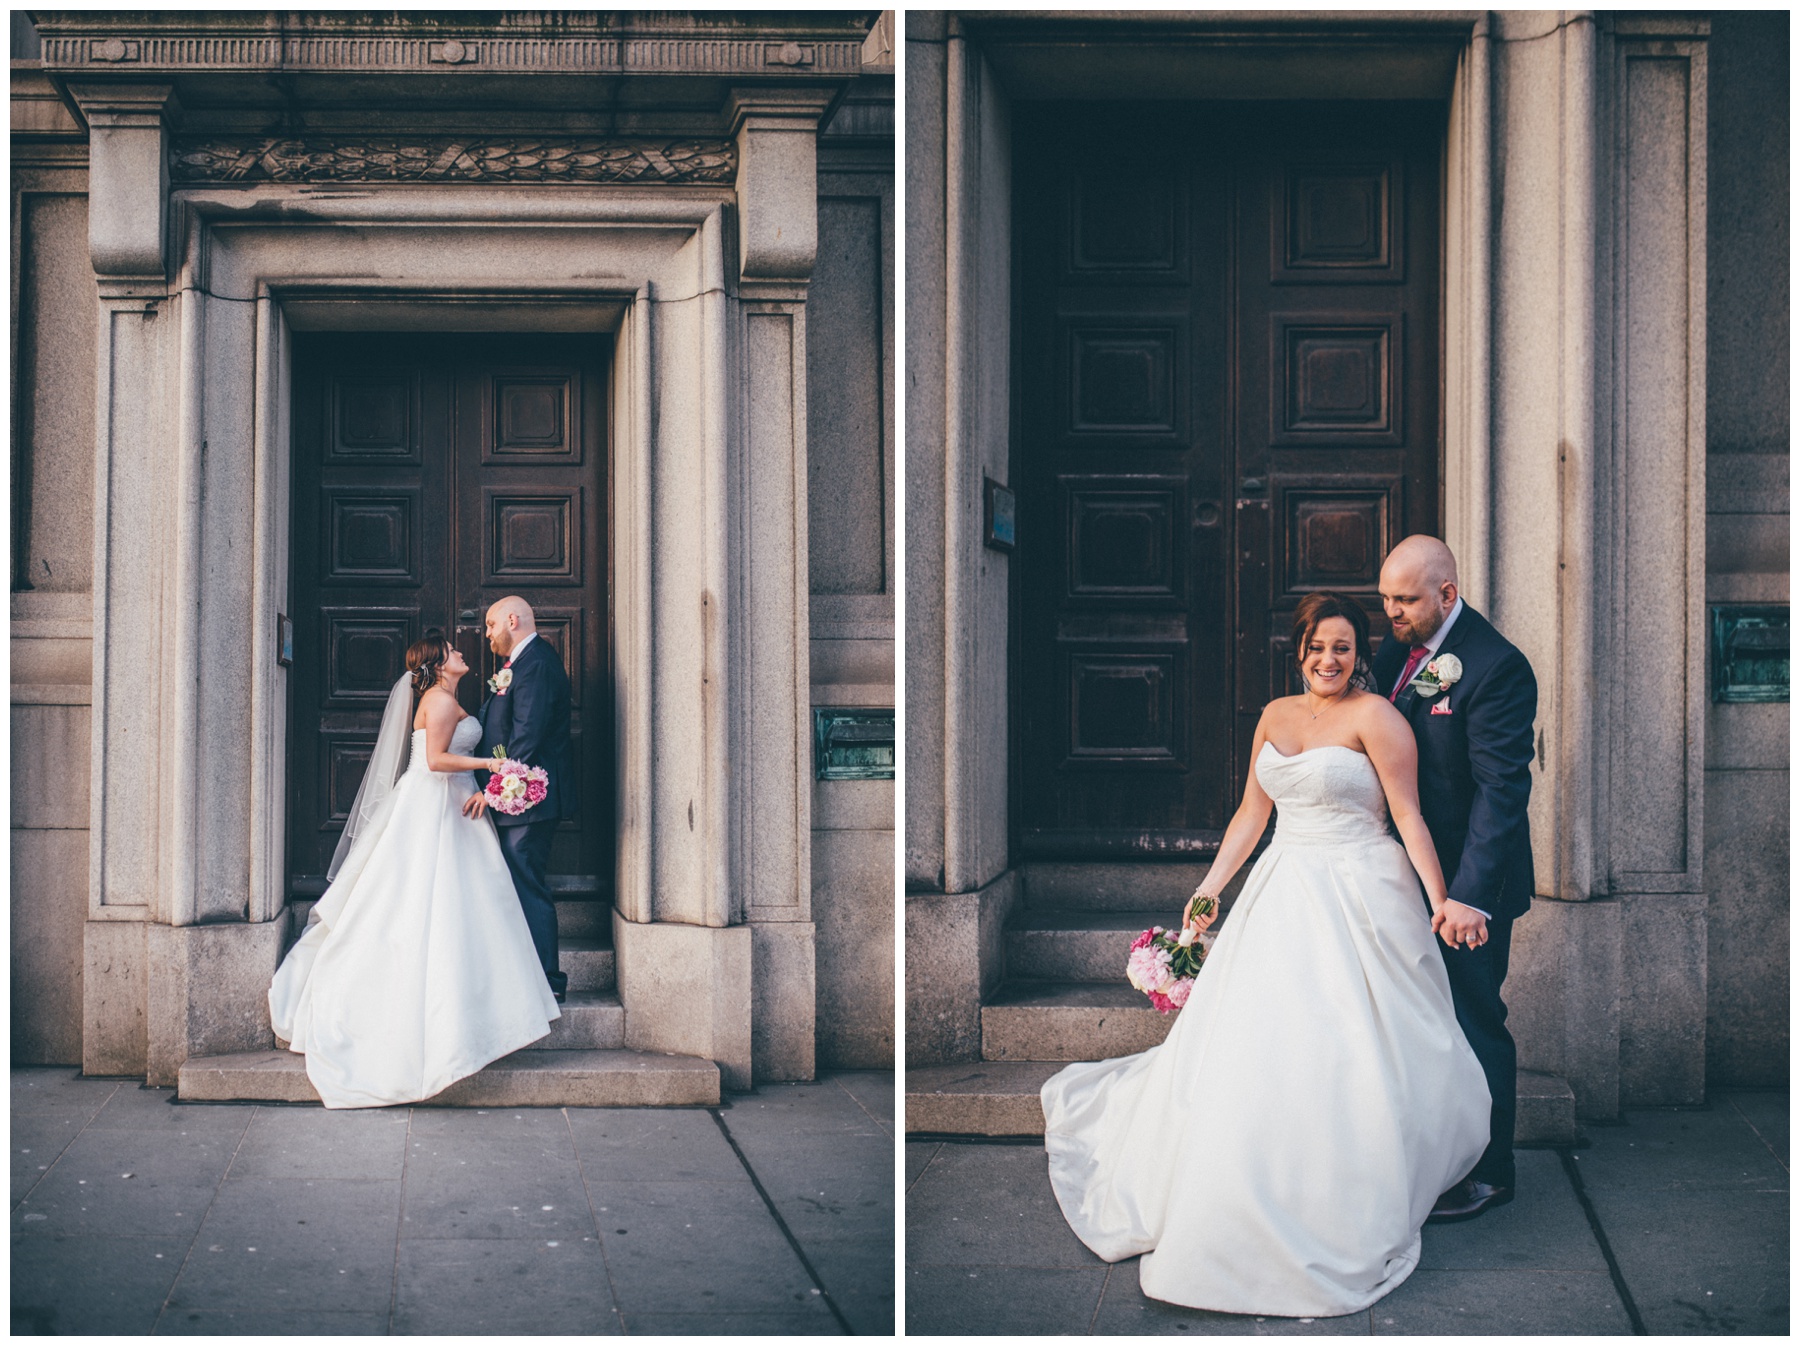 Bride and Groom at their Liverpool City centre wedding.